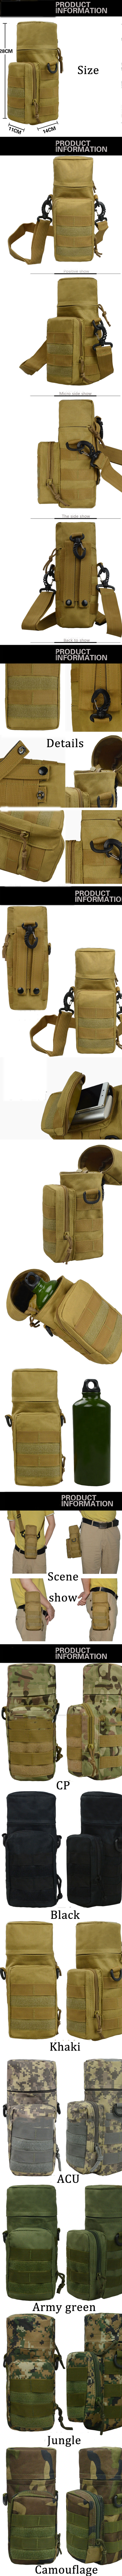 BL051-52L-Water-Bottle-Bag-Waterproof-Oxford-Fabric-Bag-Military-Tactical-Molle-Waist-Bag-Utility-Po-1463803